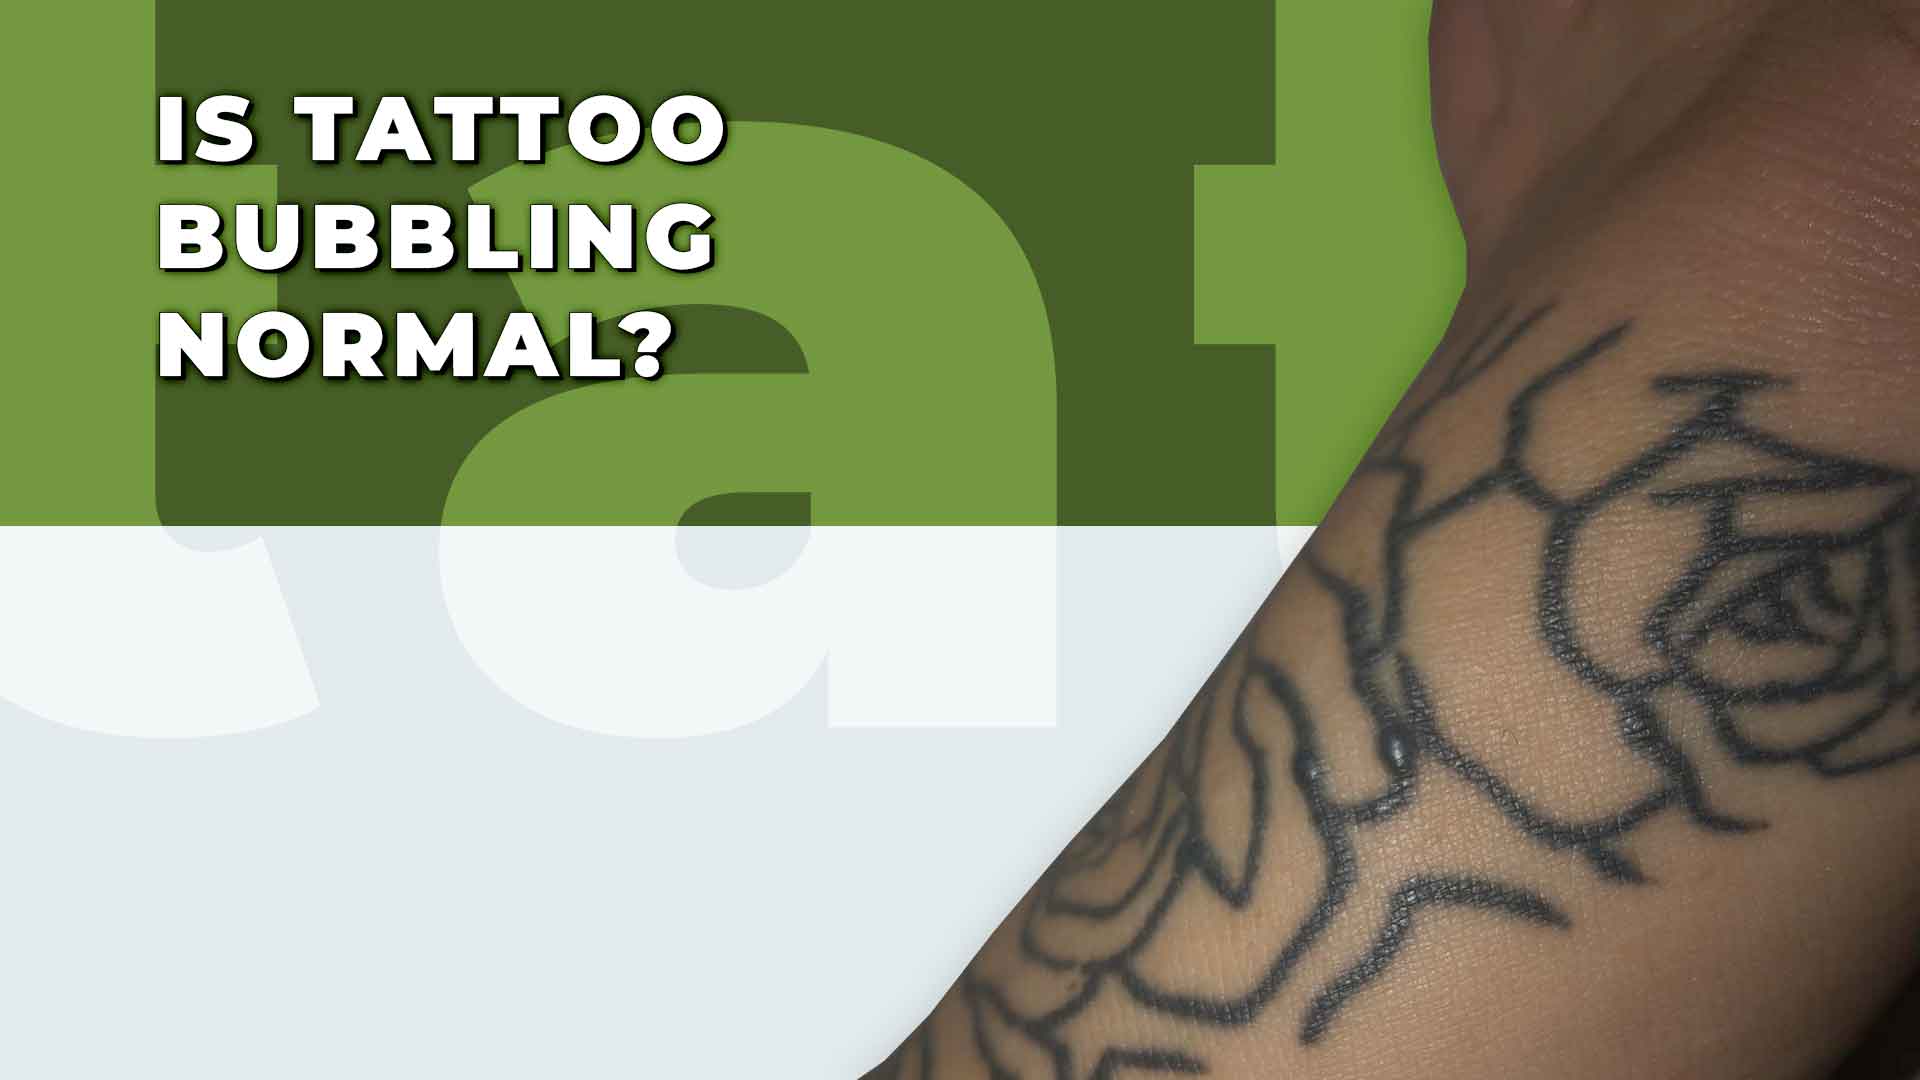 3. Is Tattoo Bubbling Normal